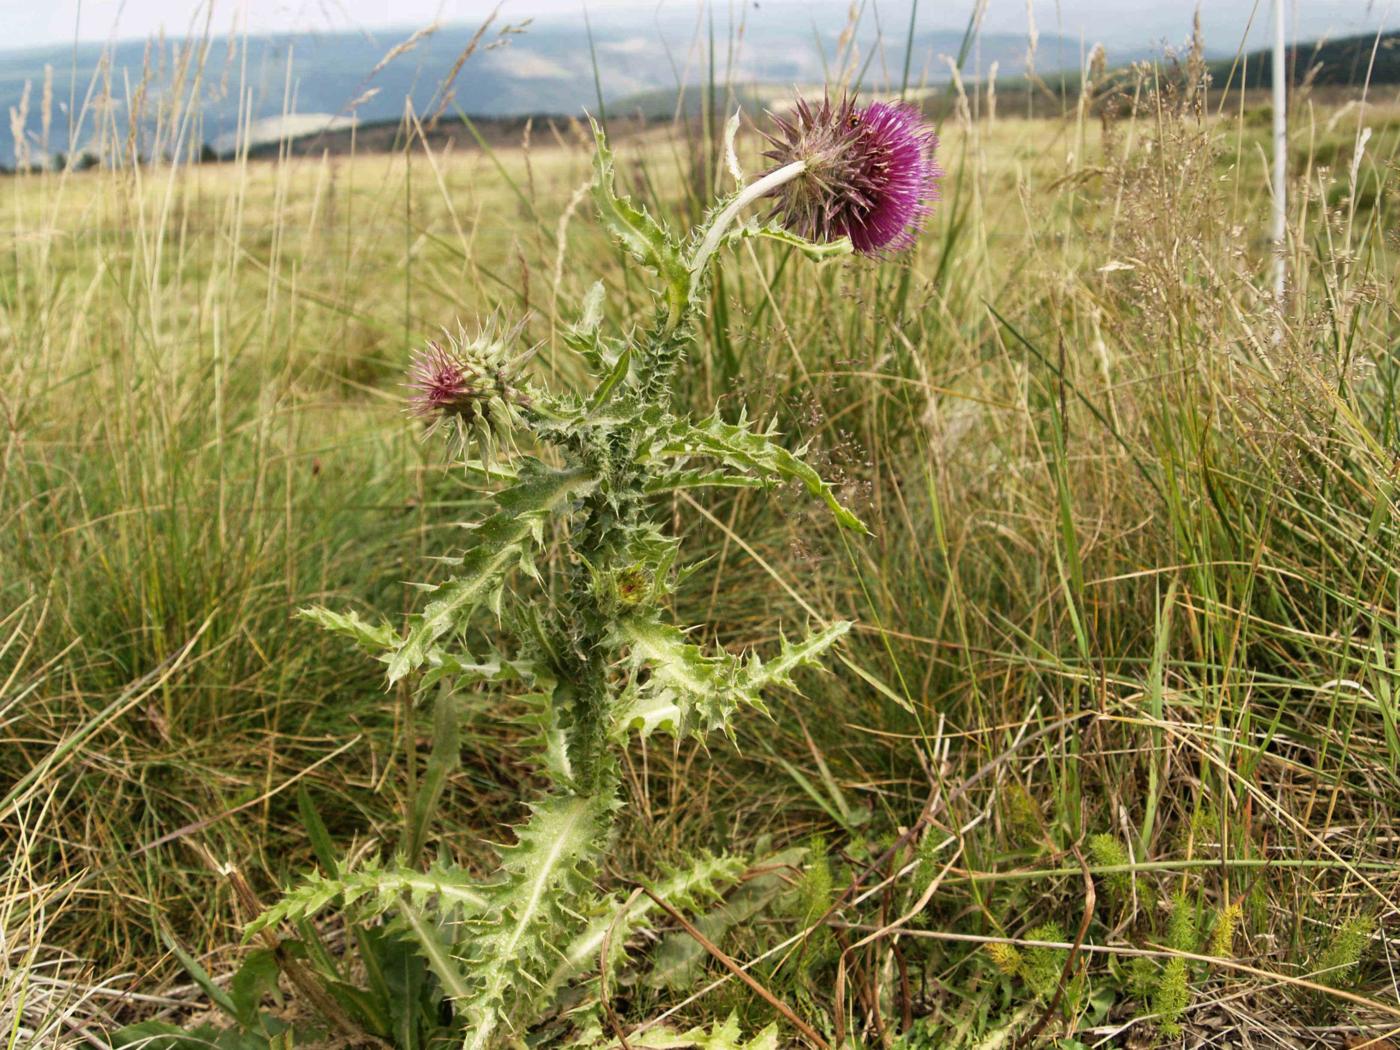 Thistle, Musk plant